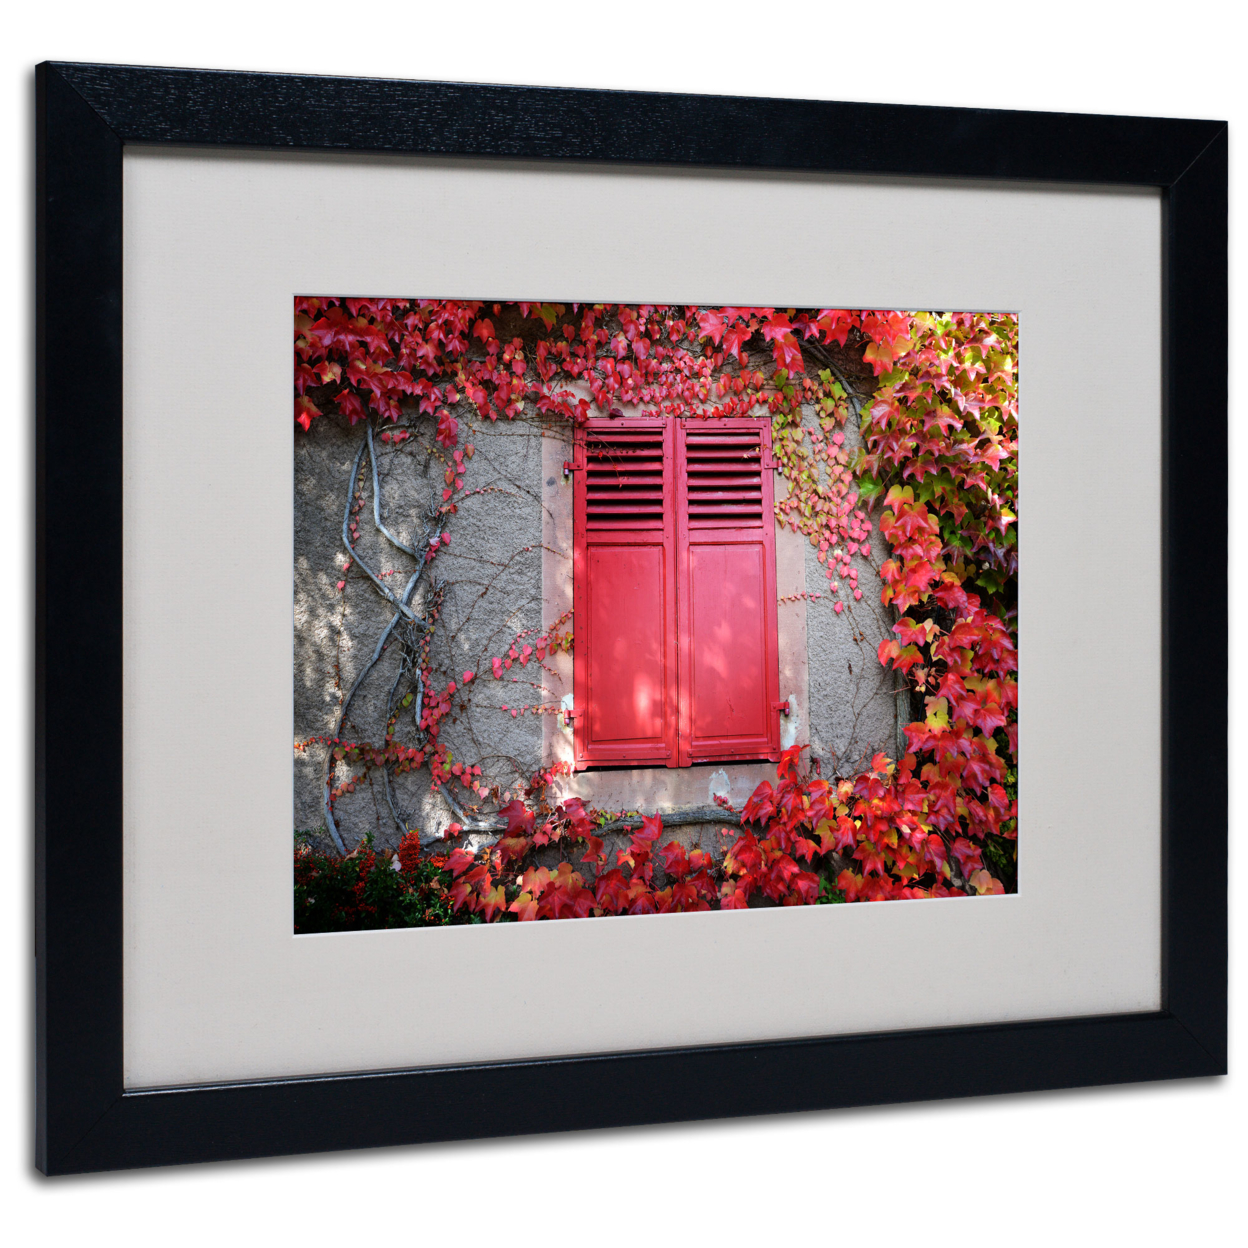 Philippe Sainte-Laudy 'Red Windowpane' Black Wooden Framed Art 18 X 22 Inches